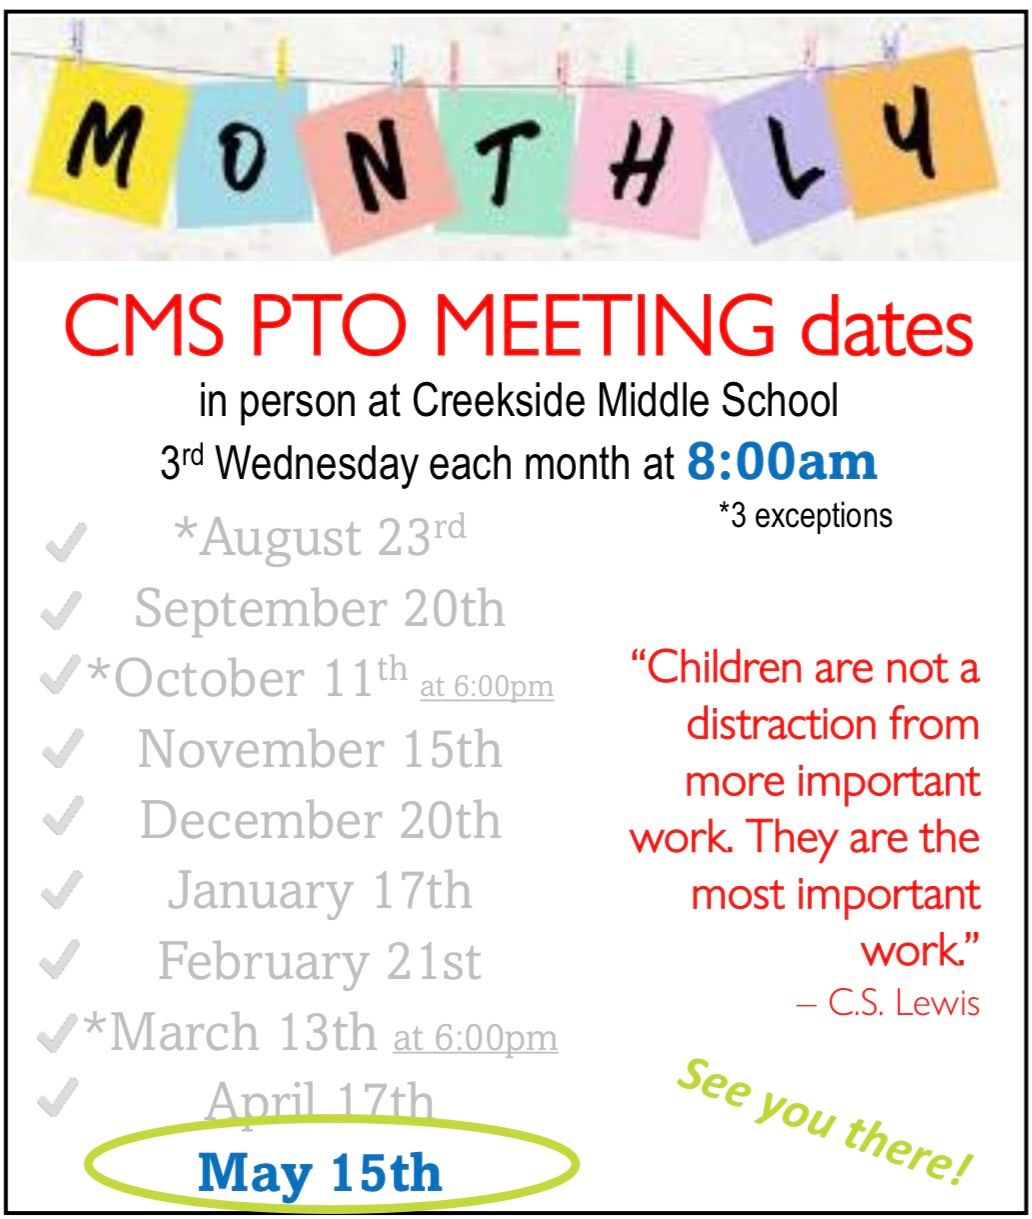 CMS PTO MEETING - vote new board!